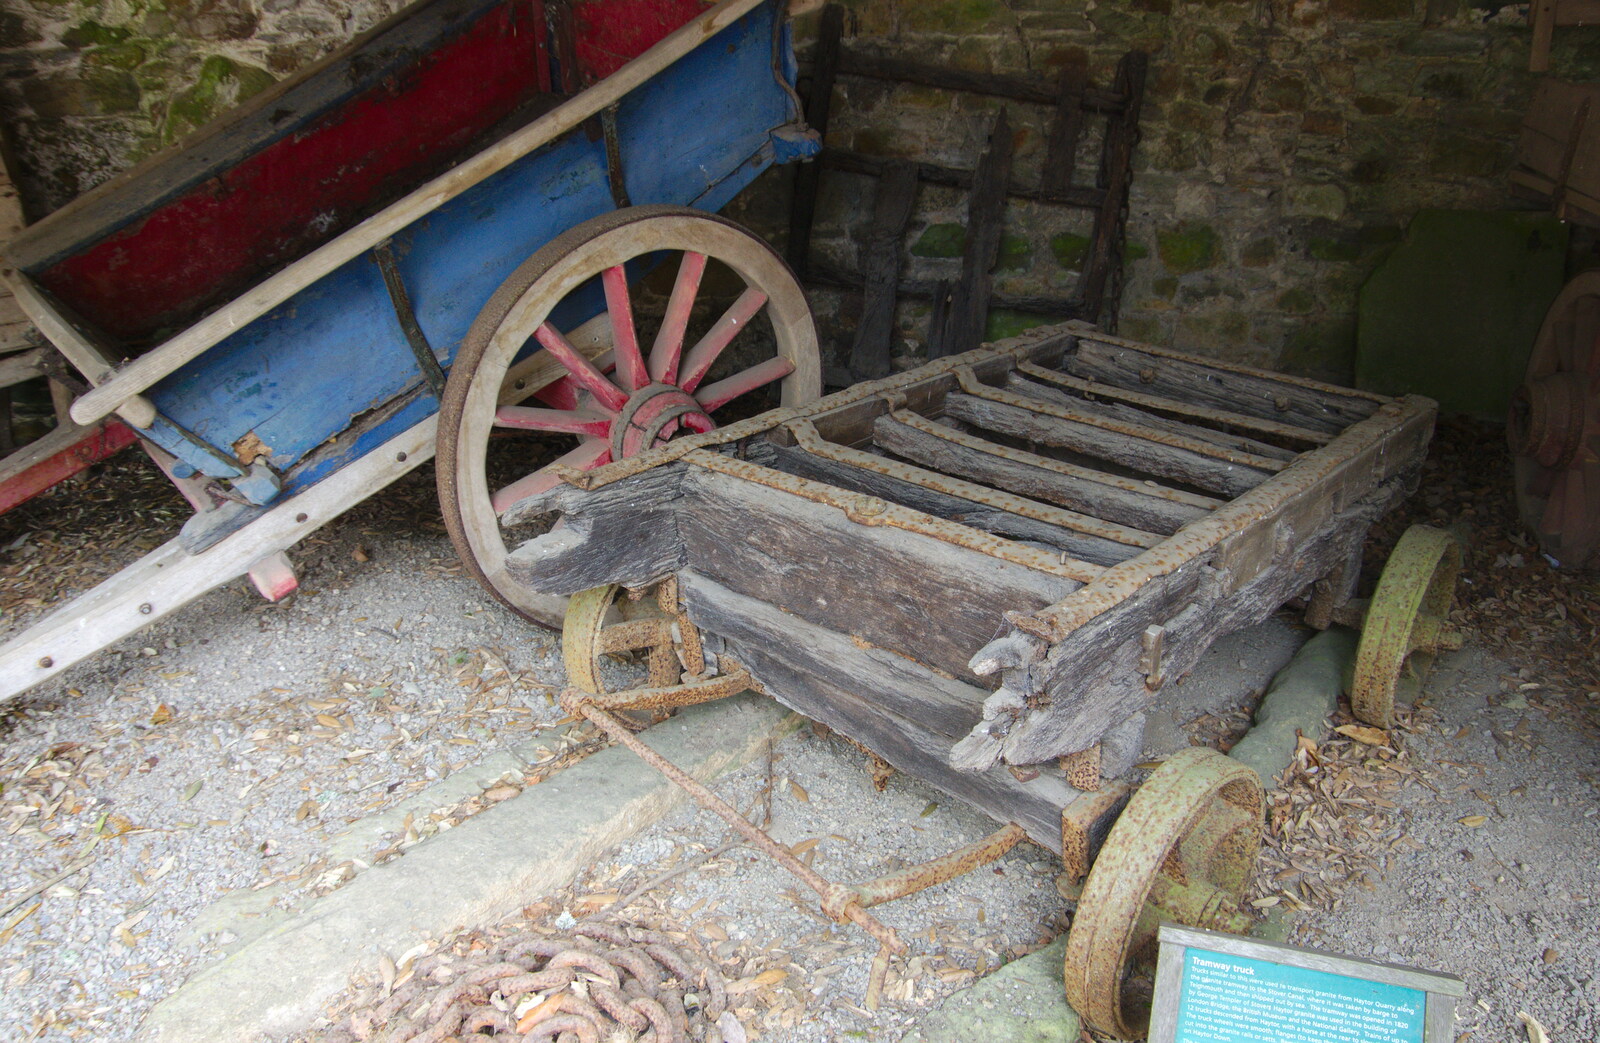 An ancient trolley or cart from Chagford Lido and a Trip to Parke, Bovey Tracey, Devon - 25th May 2019